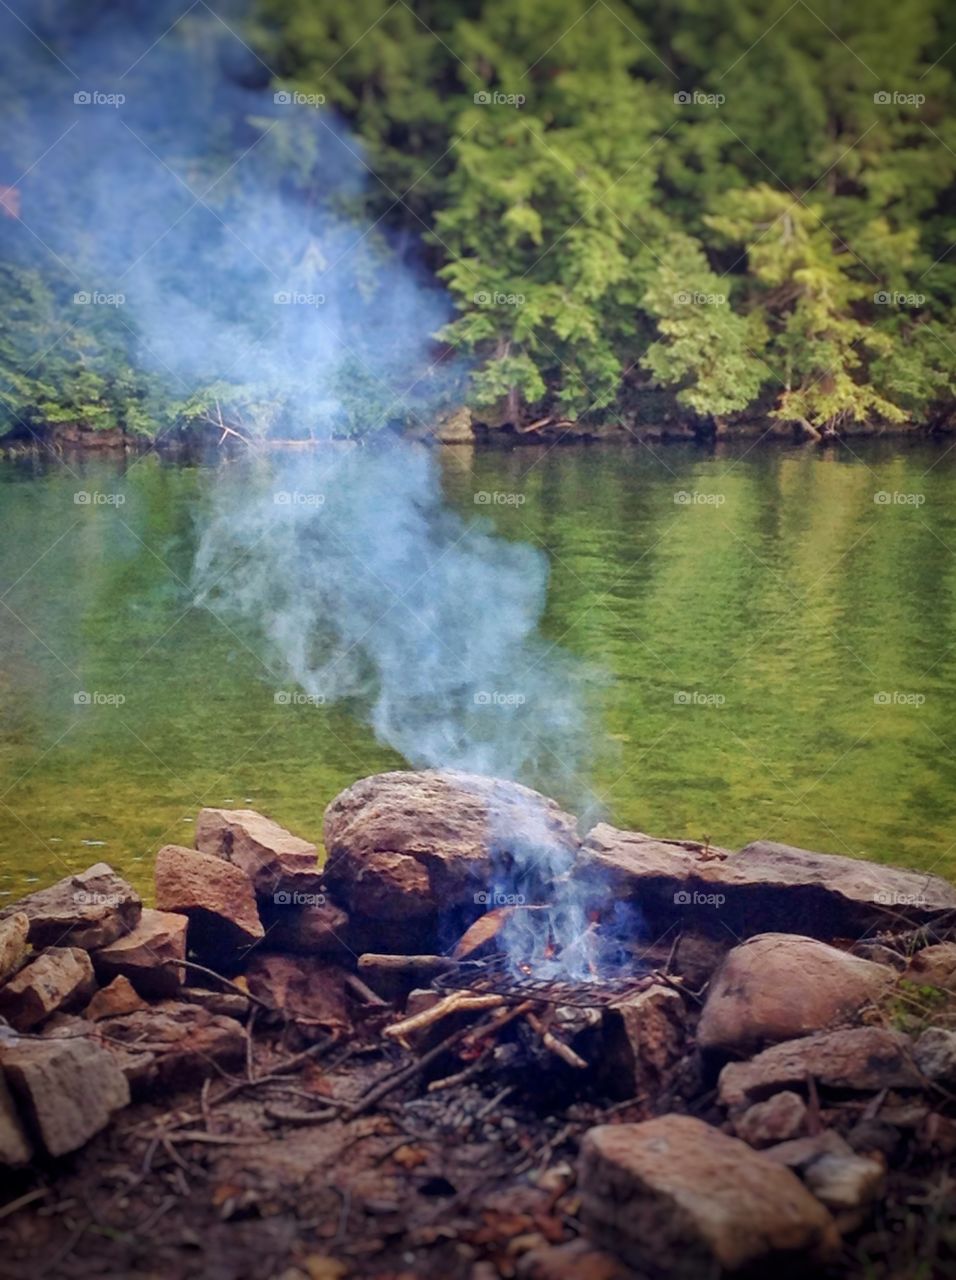 Campfire . Sit back relax and enjoy what Mother Nature has to give.